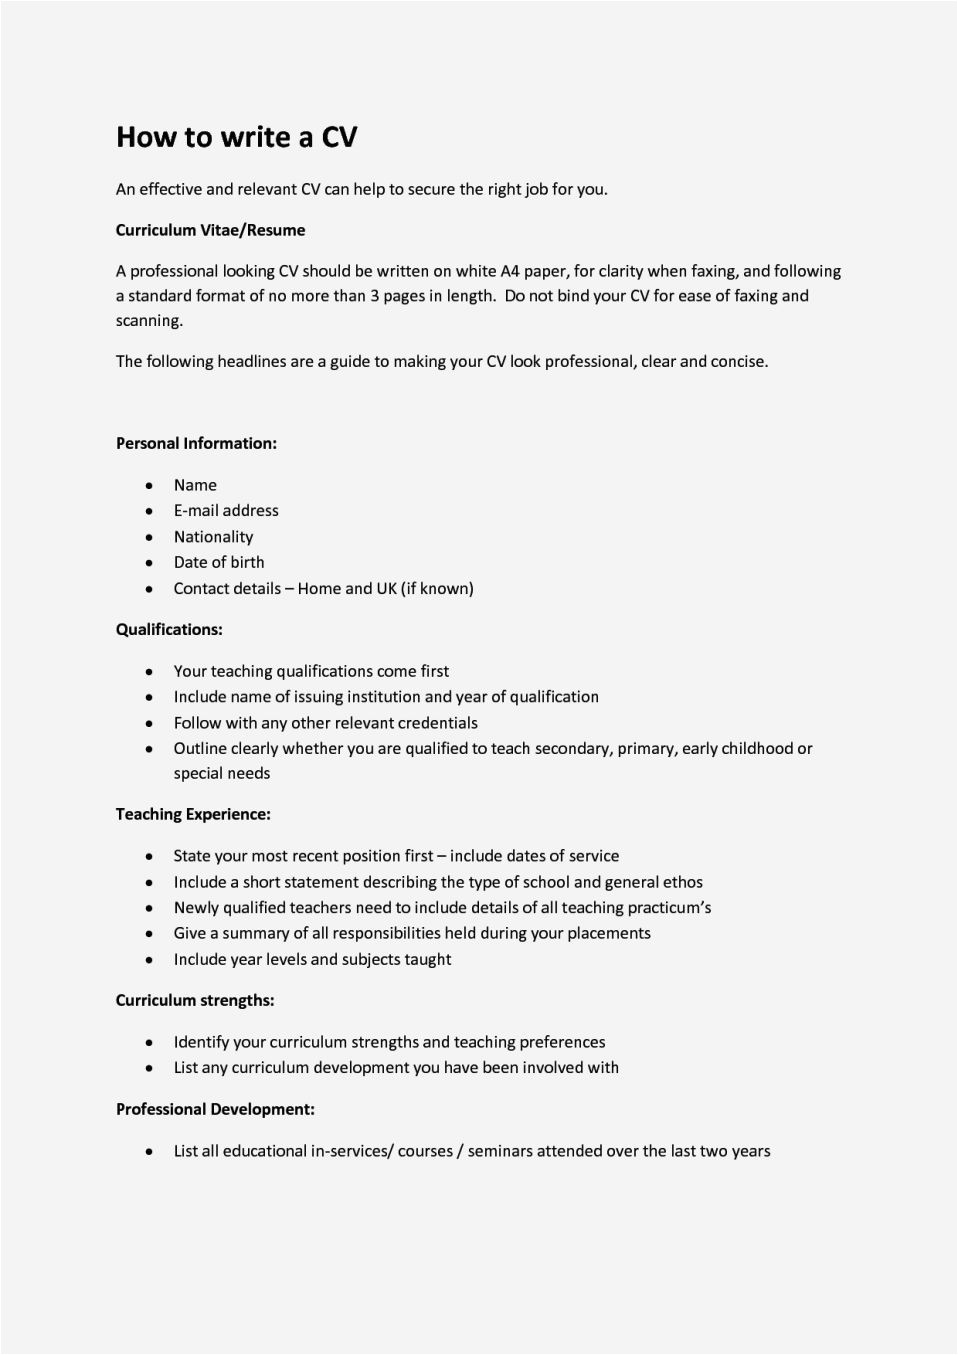 How to Write A Cv Cover Letter Examples How to Write A Cv for A 16 Year Old with No Experience Uk